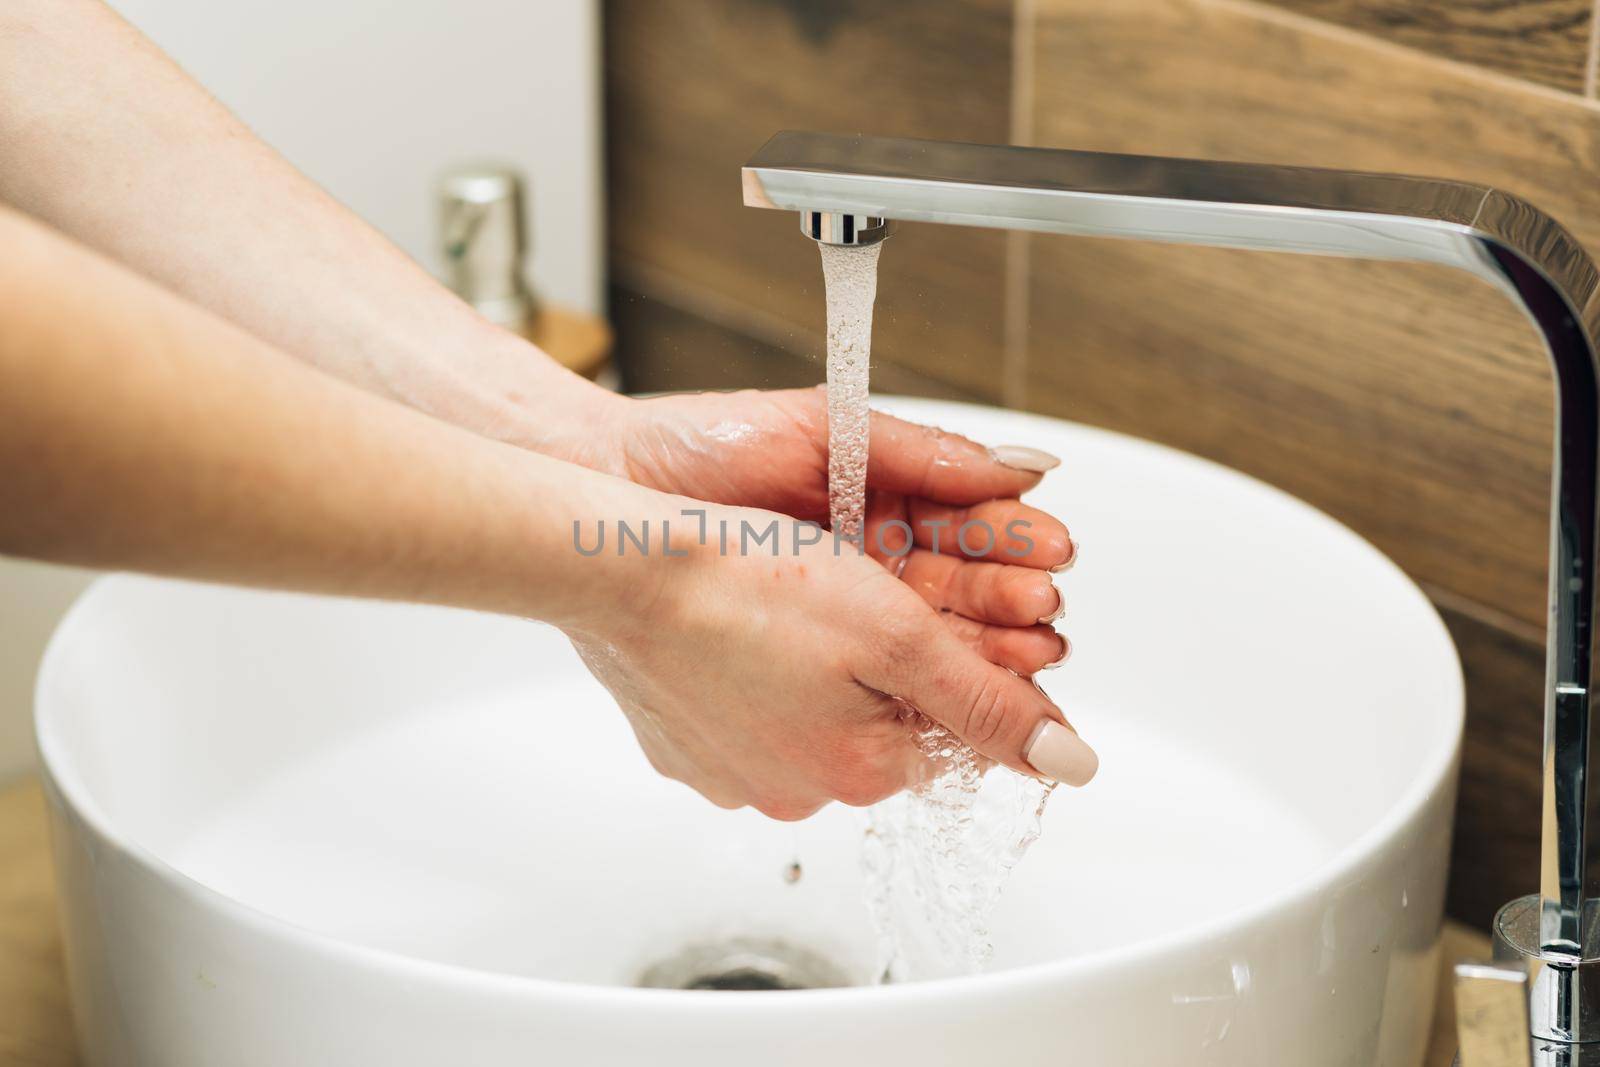 Hands of woman wash their hands in a sink to wash the skin and water flows through the hands. Concept of health, cleaning and preventing germs and coronavirus from contacting hands by uflypro